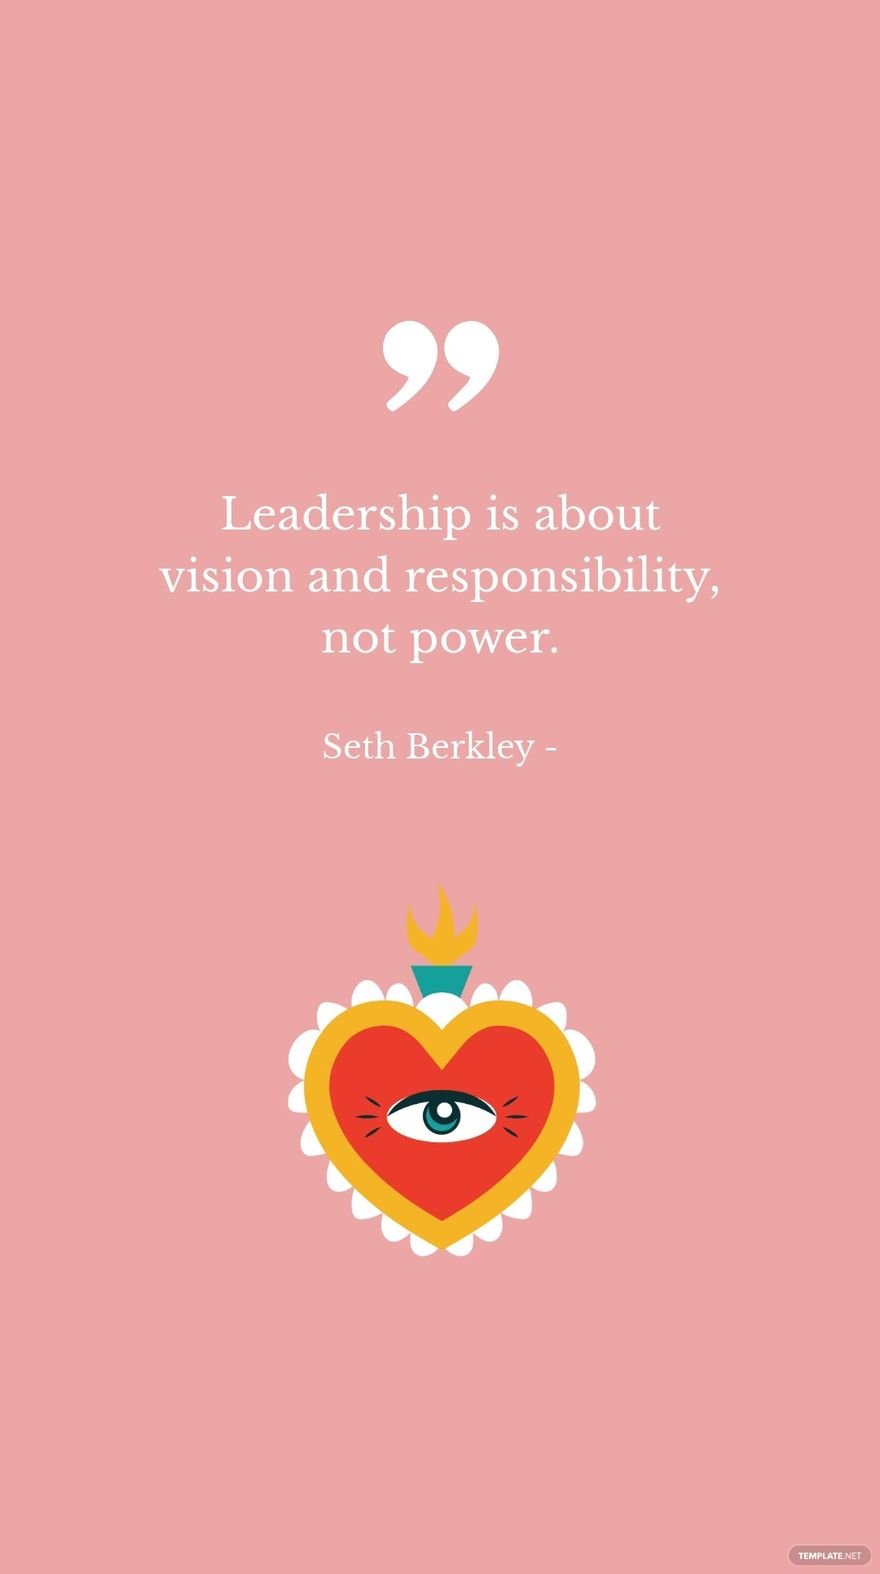 Seth Berkley - Leadership is about vision and responsibility, not power.